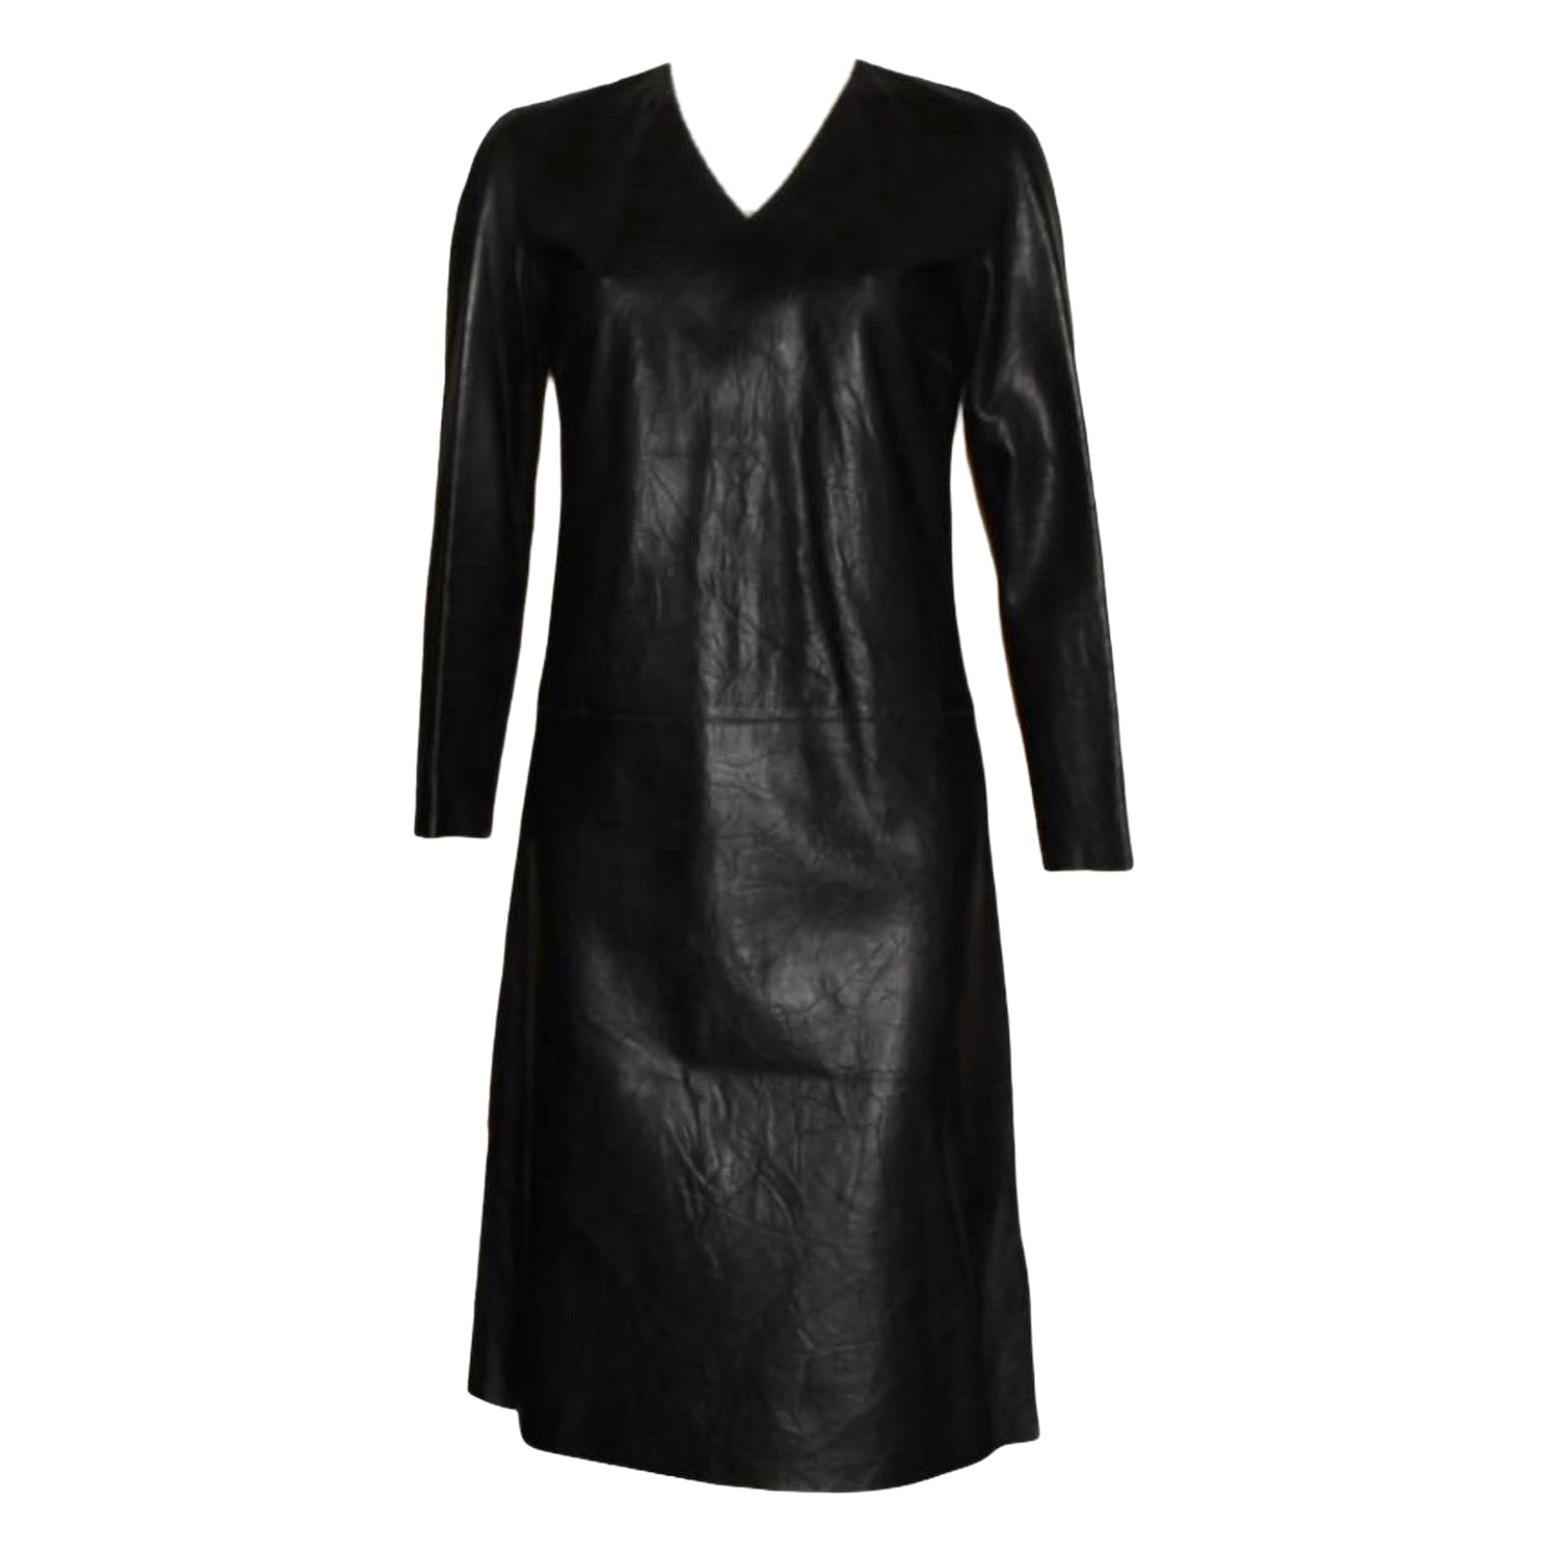 GUCCI by Tom Ford Crinkled Black Leather Dress Gown 38 S/S 2000